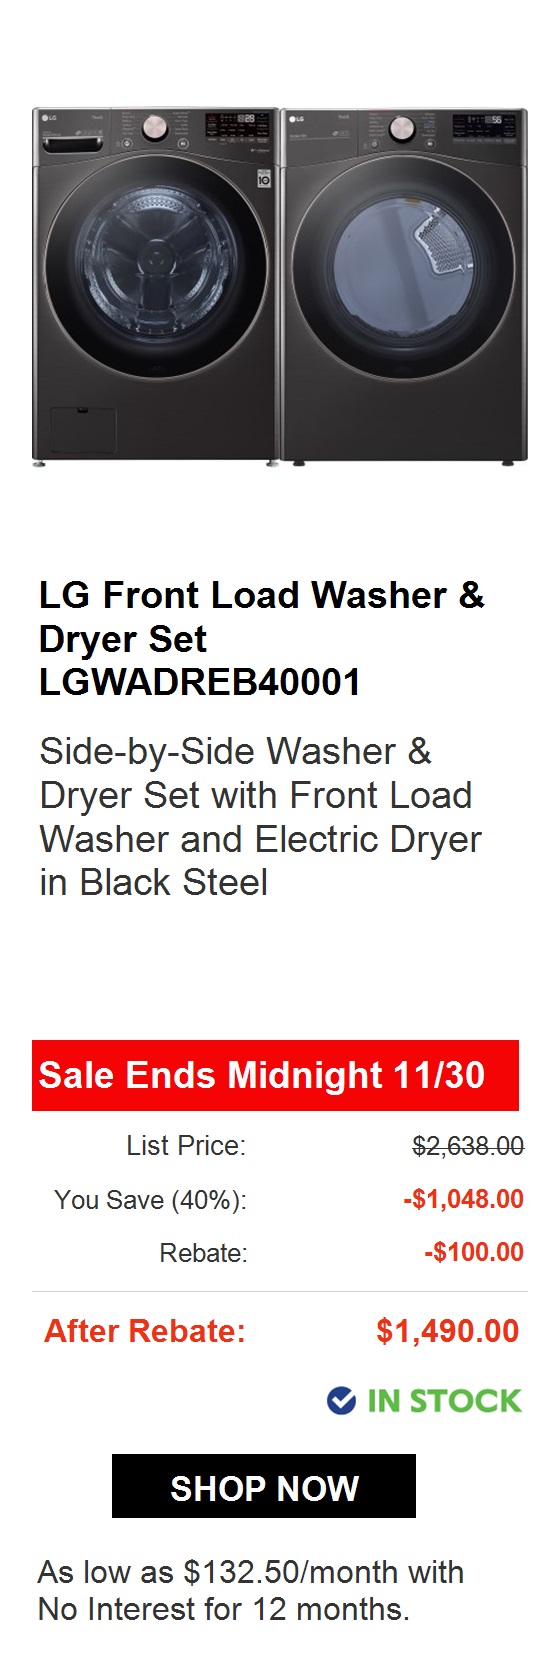  LG Front Load Washer Dryer Set LGWADREV36001 Side-by-Side Washer Dryer Set with Front Load Washer and Electric Dryer in Graphite Steel Sale Ends Midnight 1130 List Price: $2,528.00 You Save 37%: -$929.60 Rebate: -$100.00 After Rebate: $1,498.40 @ IN STOCK SHOP NOW As low as $88.80month with No Interest for 18 months. 